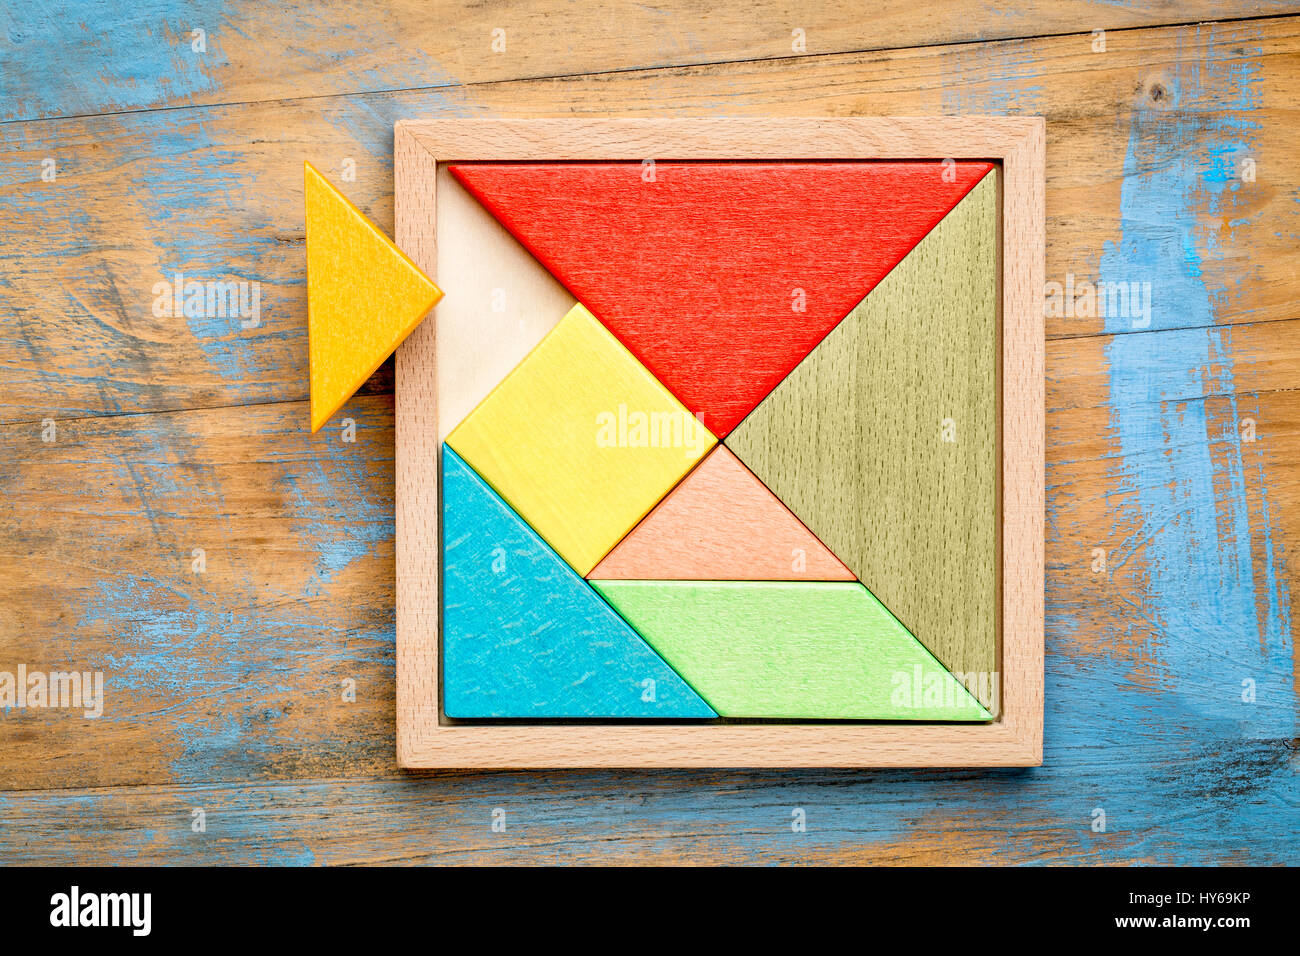 Tangram, a traditional Chinese Puzzle Game made of different wood parts to  build abstract figures from them Stock Photo - Alamy